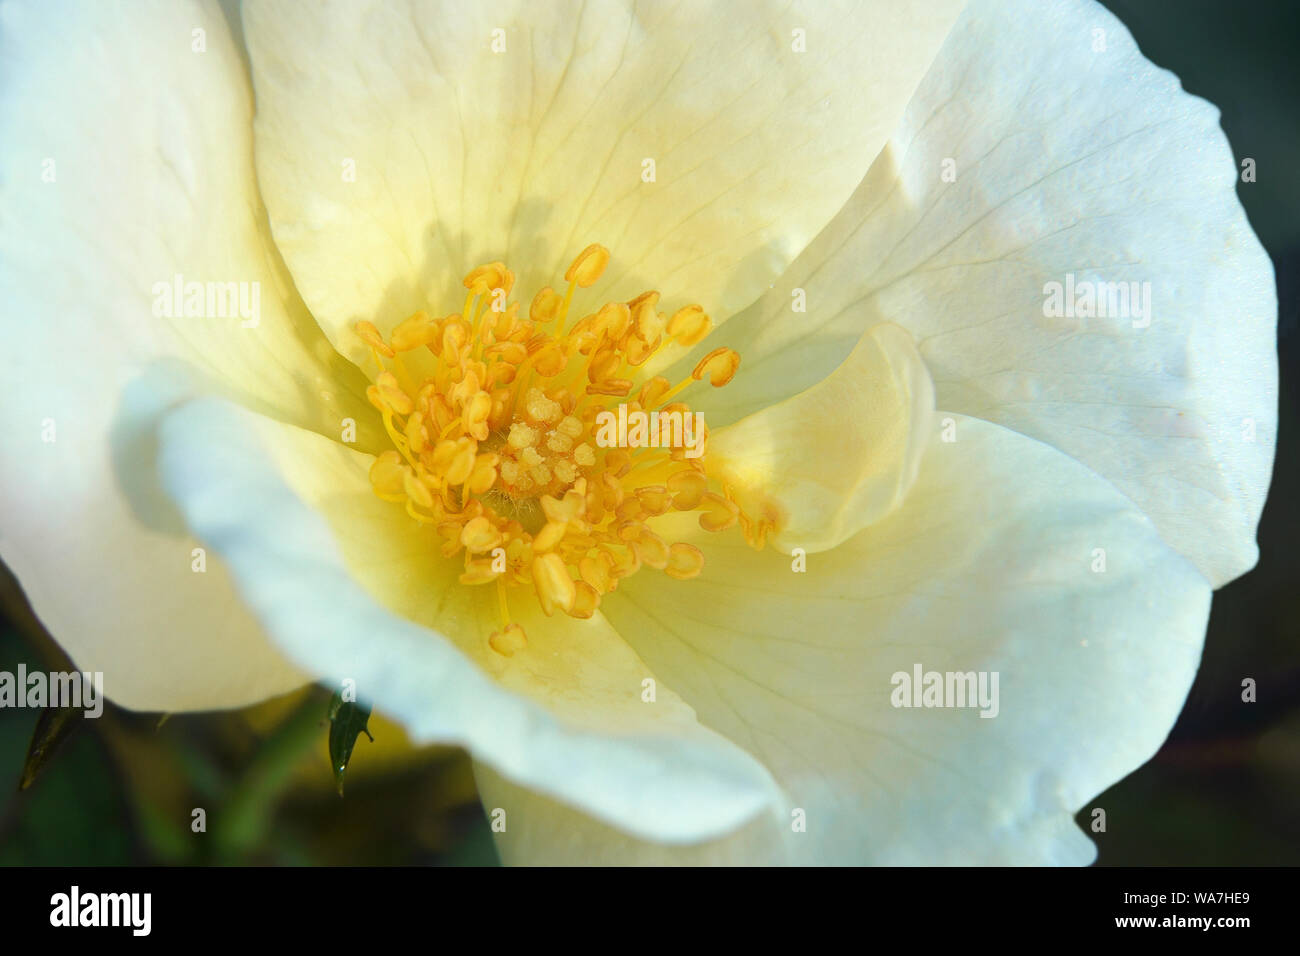 Memorial rose (Rosa wichuraiana). Another scientific name is Rosa luciae. Stock Photo